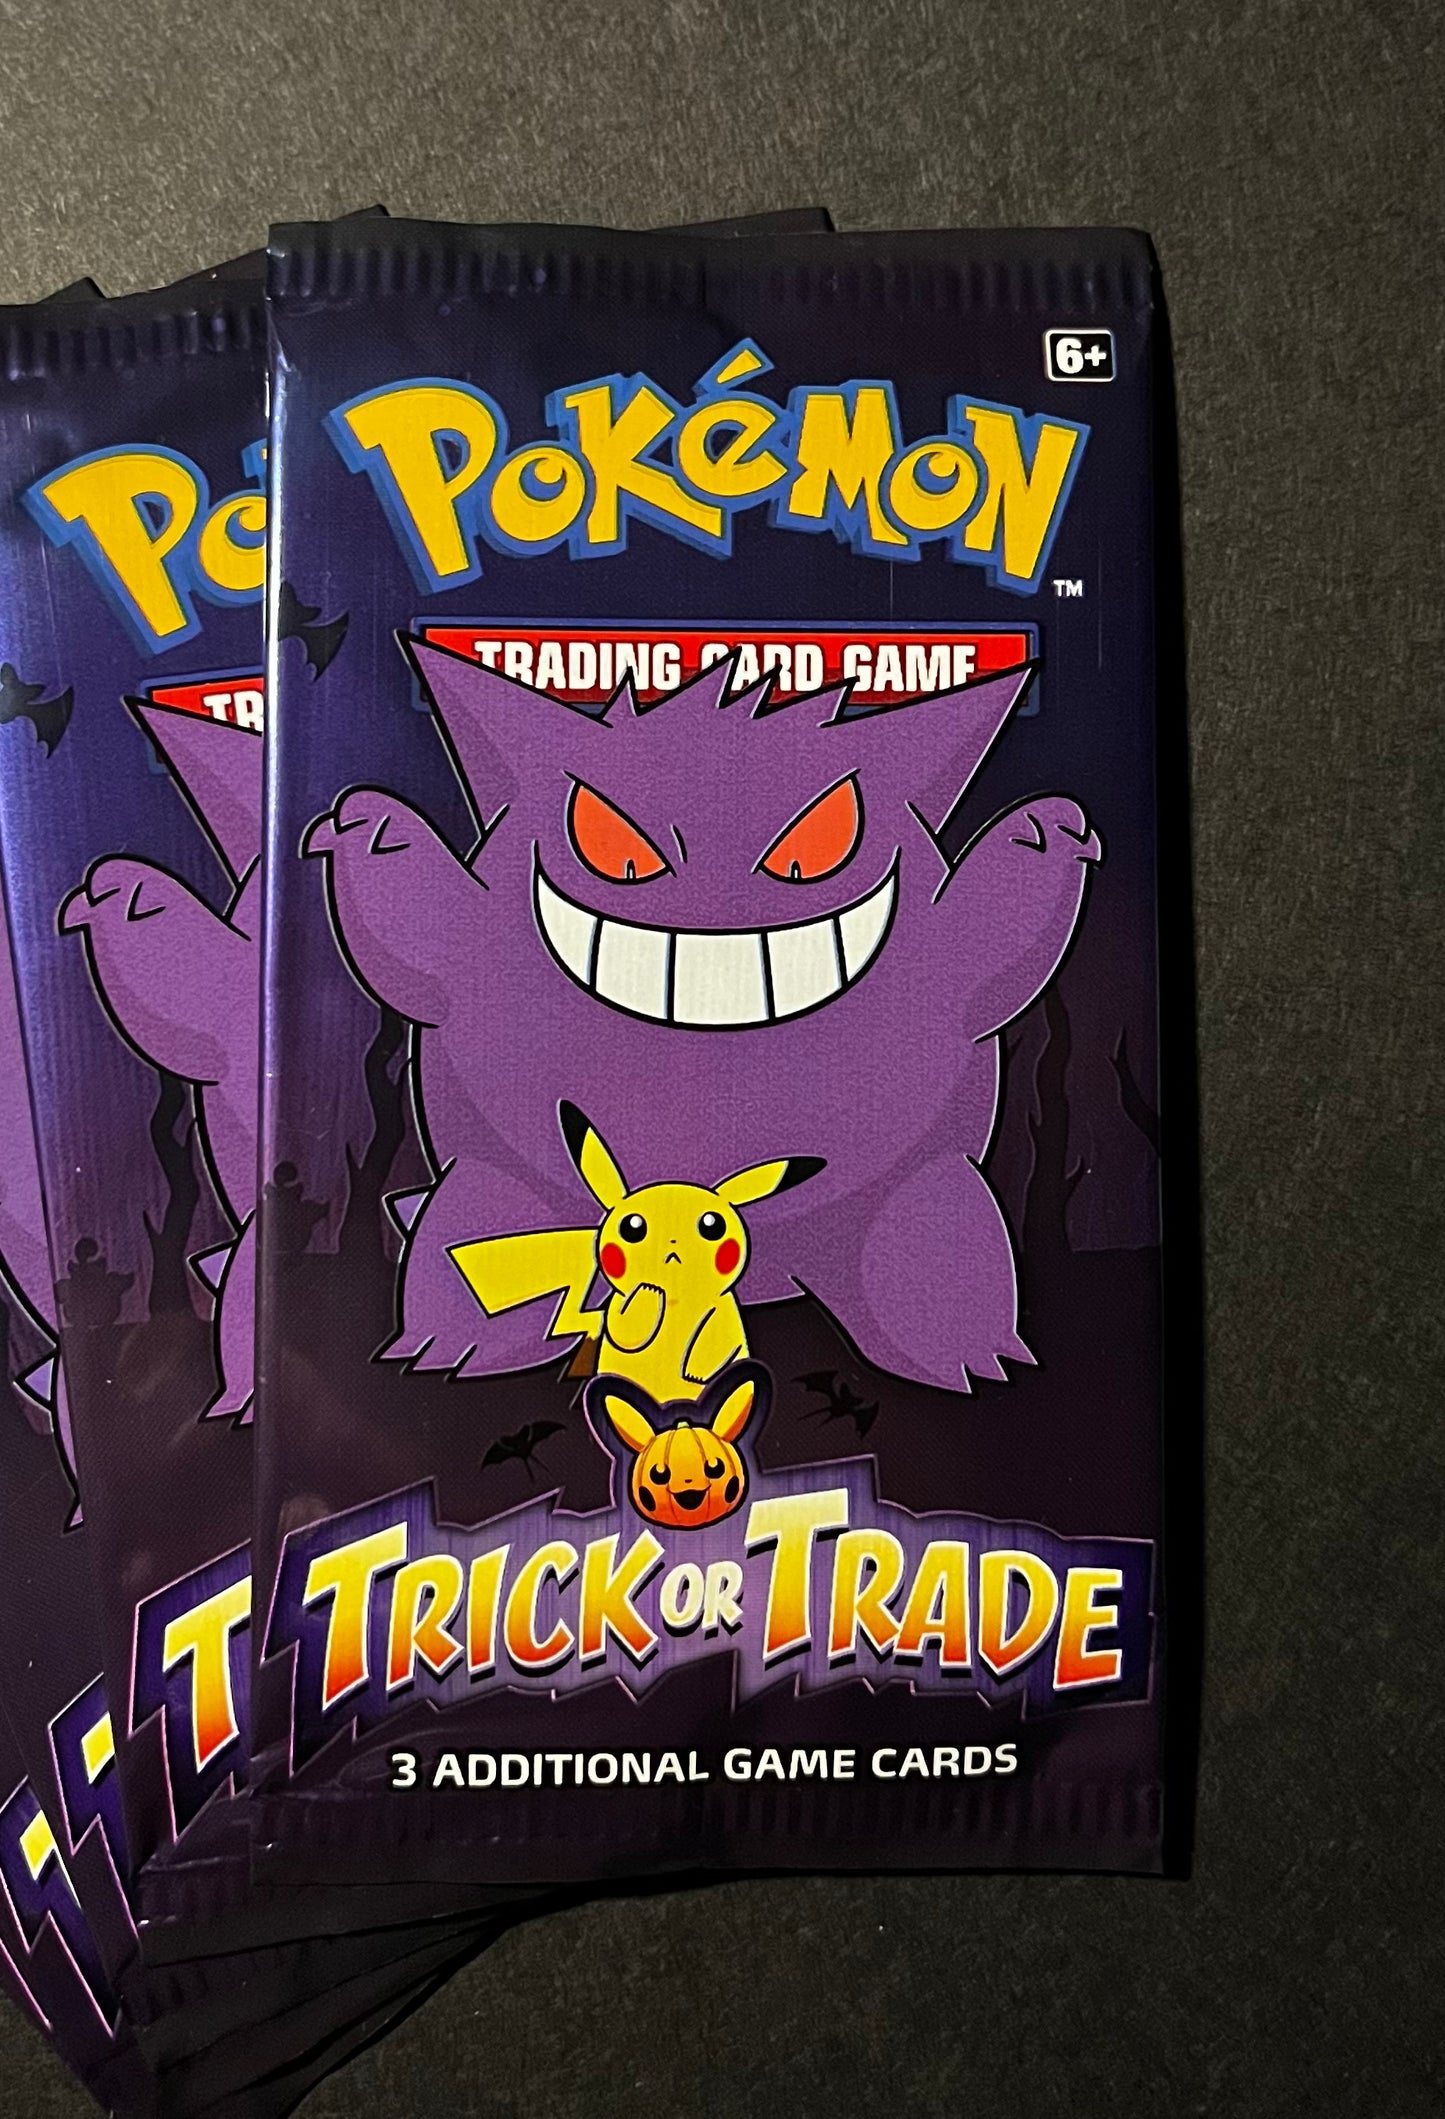 Pokemon Trick or Trade - Single Sealed Mini Booster Pack - 3 Cards per Pack